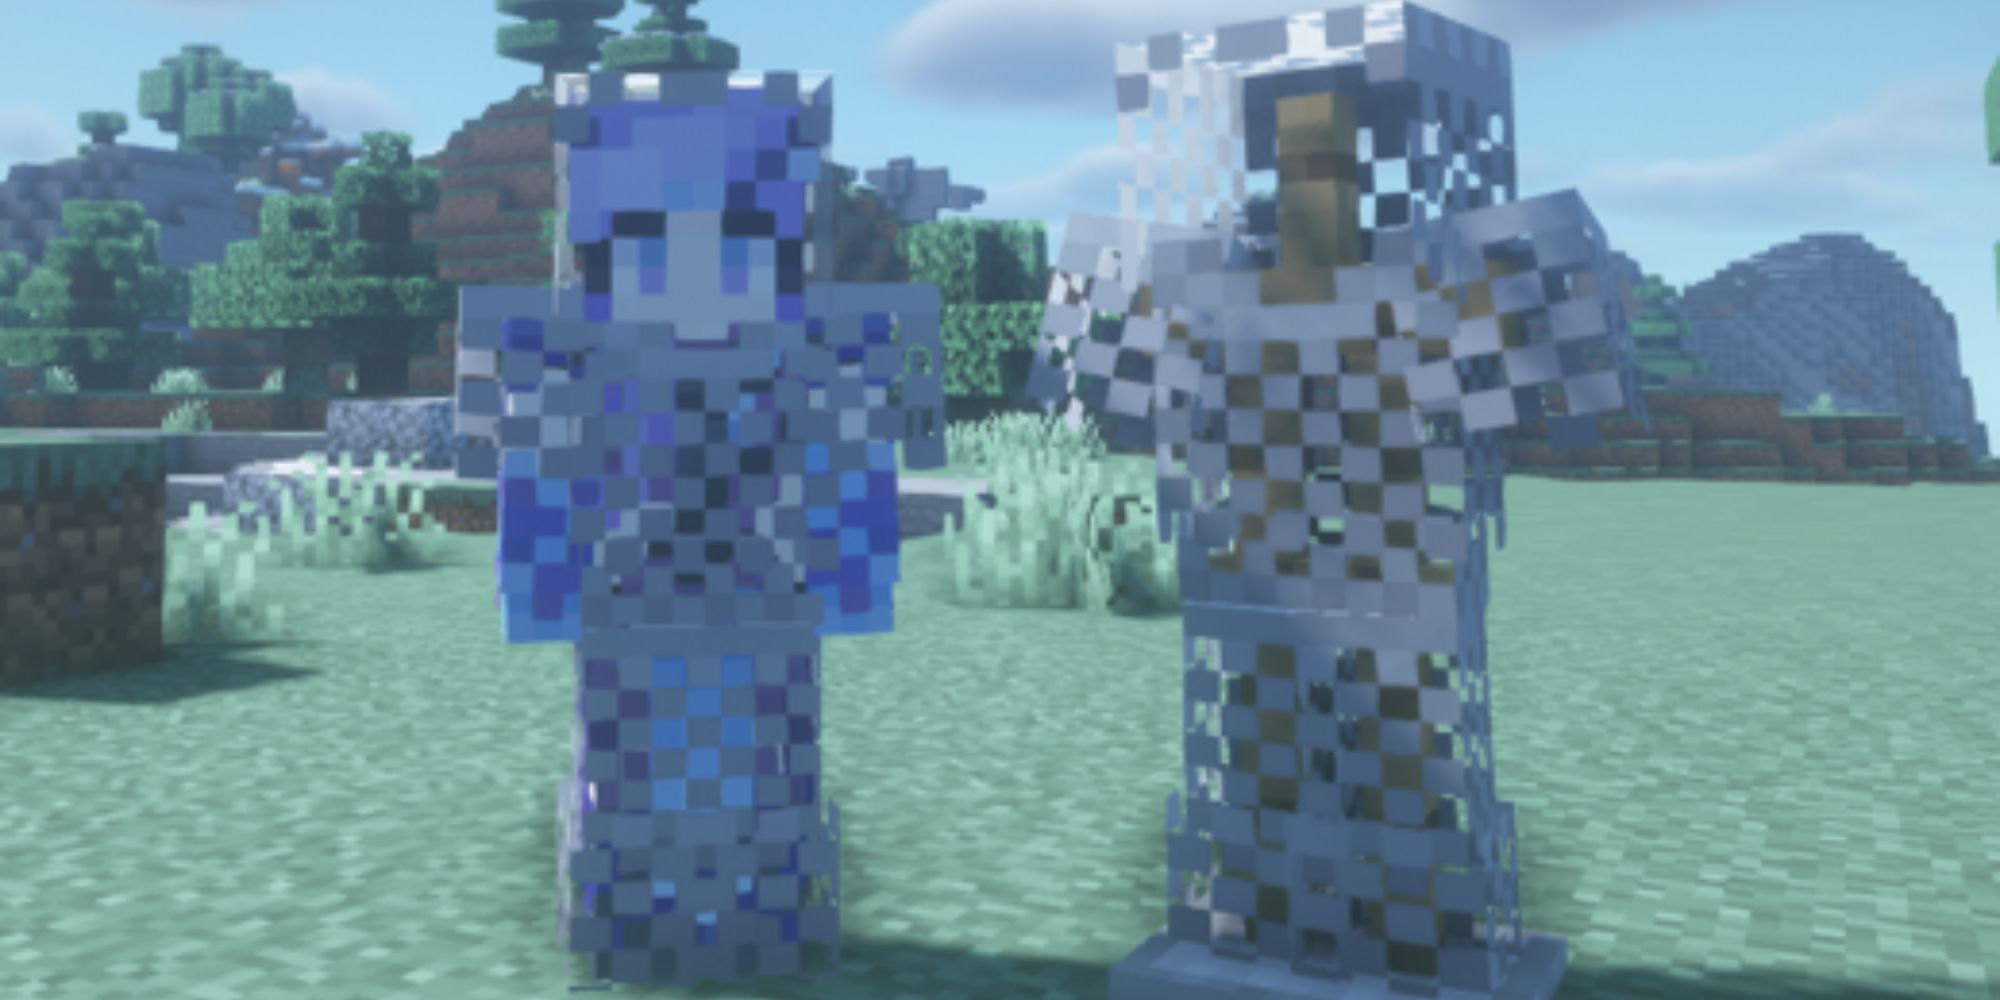 Minecraft Chainmail Armor Set on character and mannequin side by side